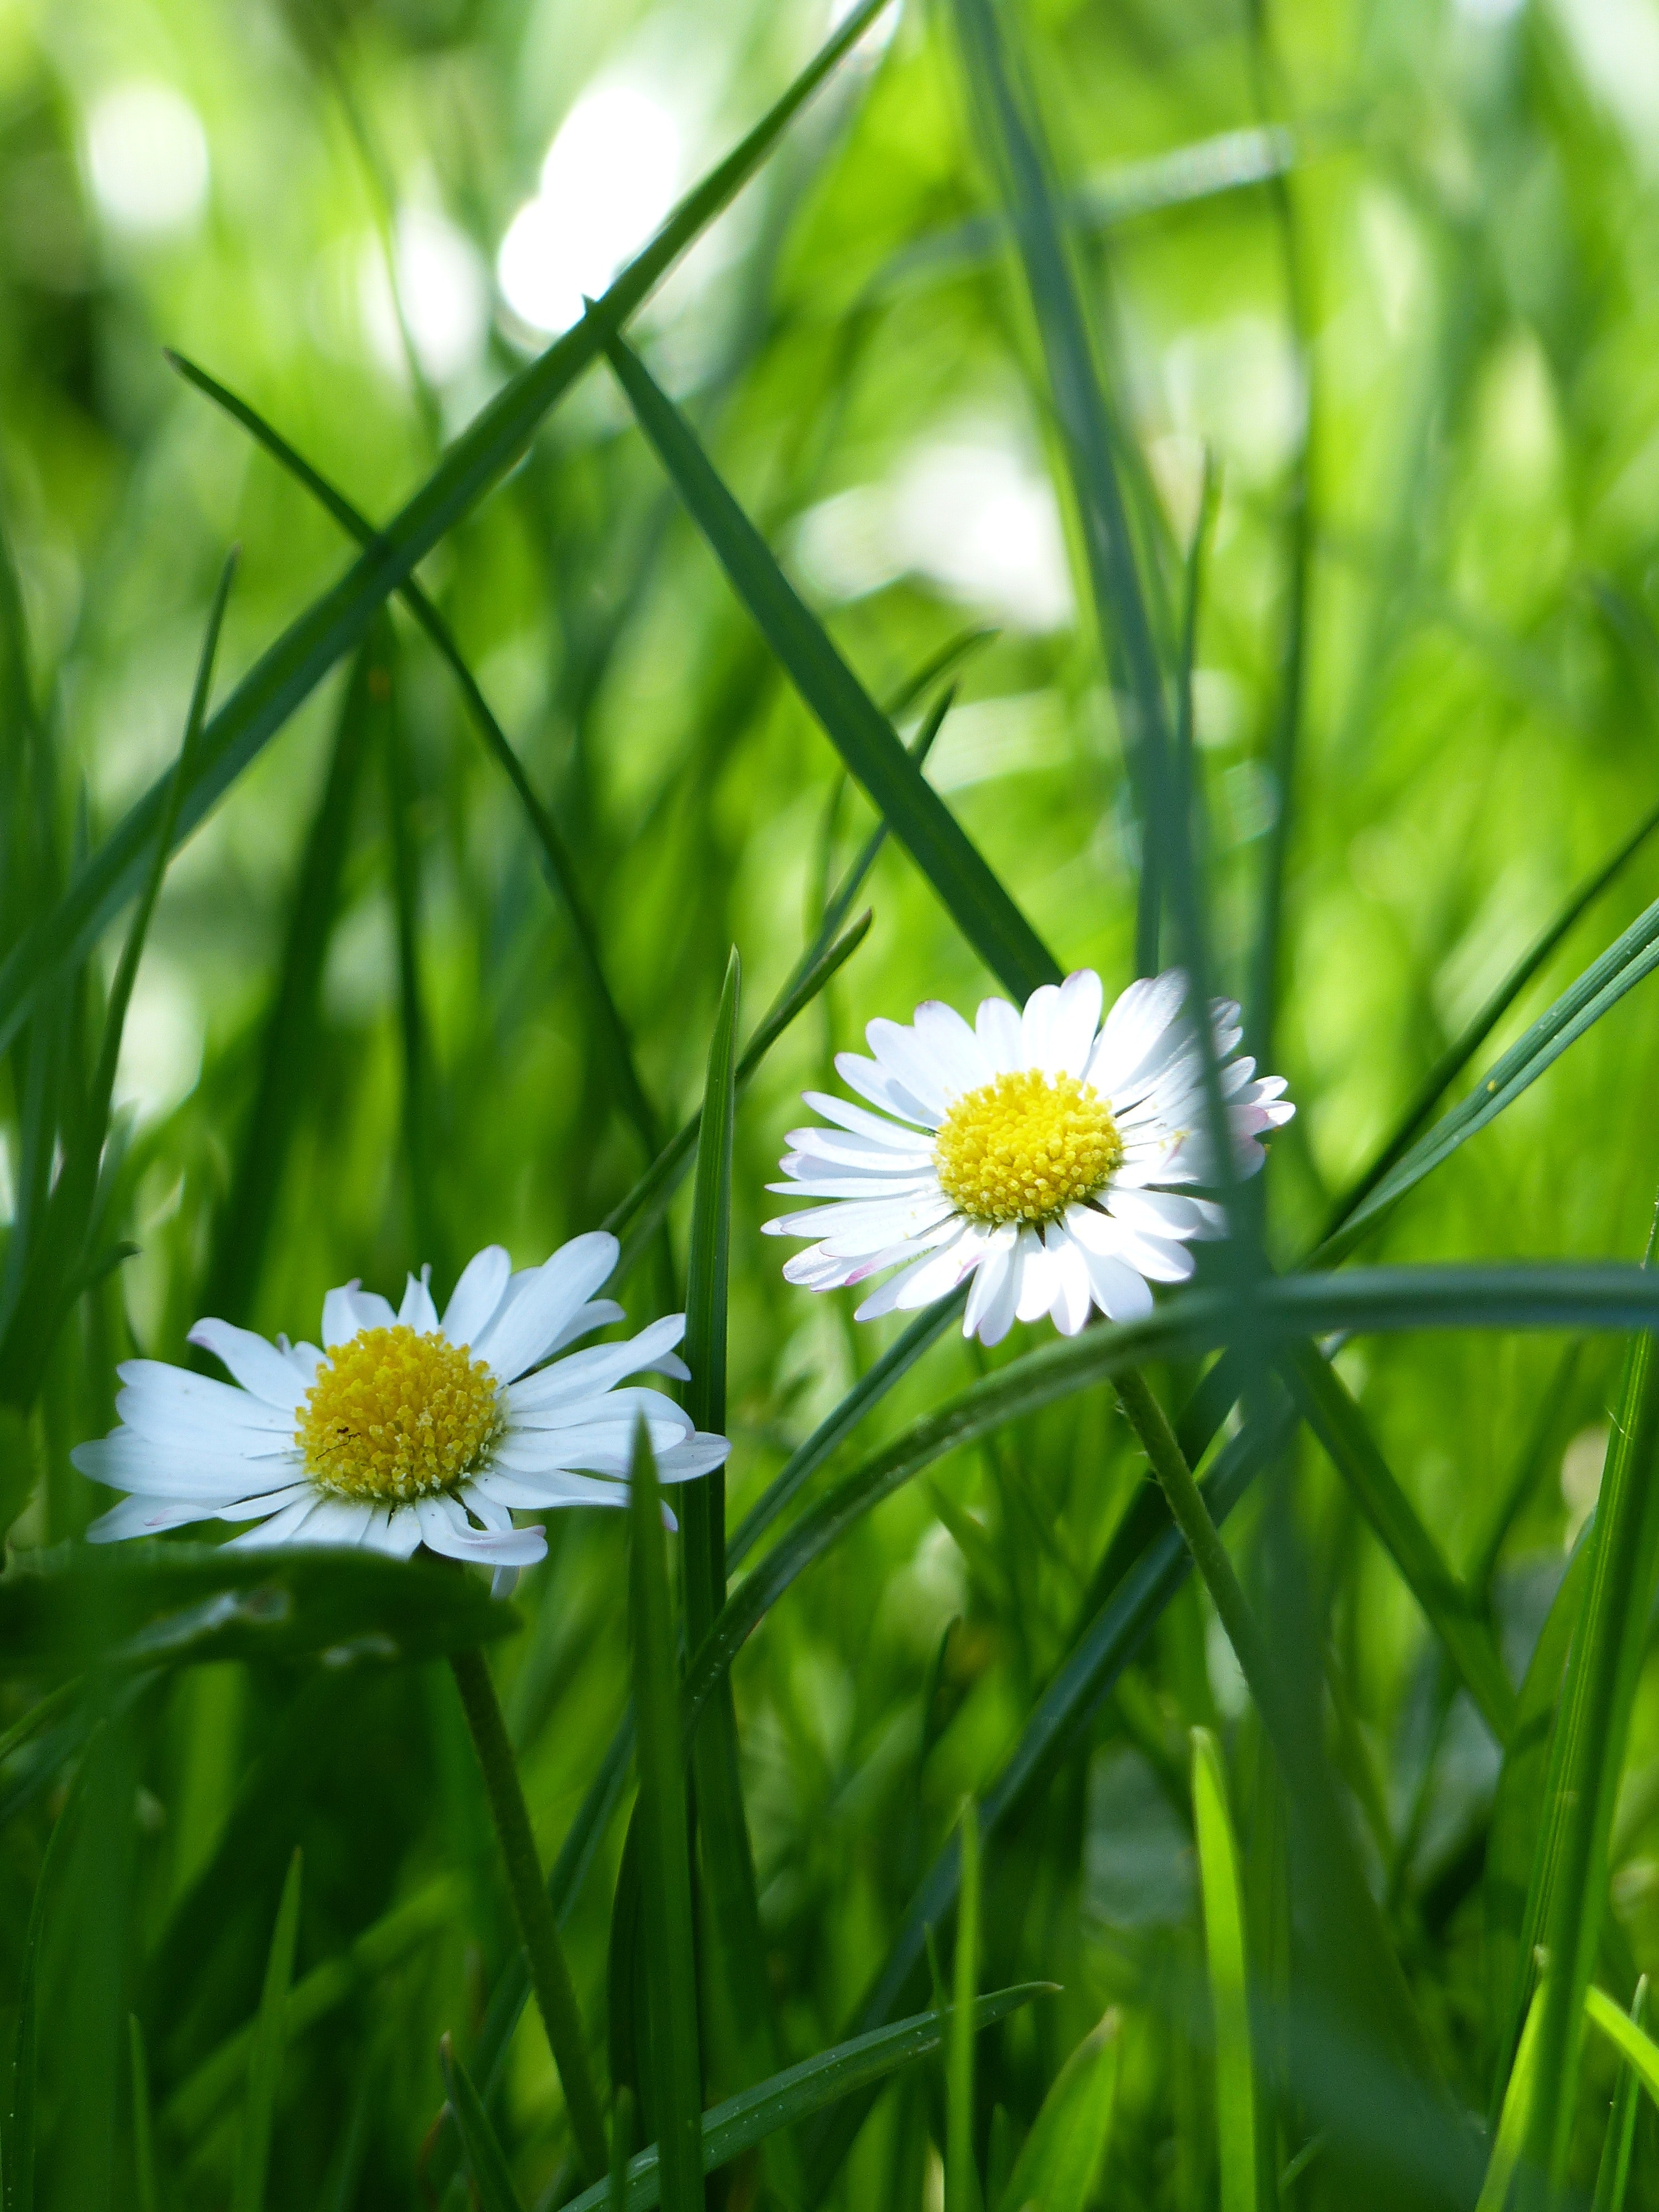 Yellow and white flower surrounded by green grass photo